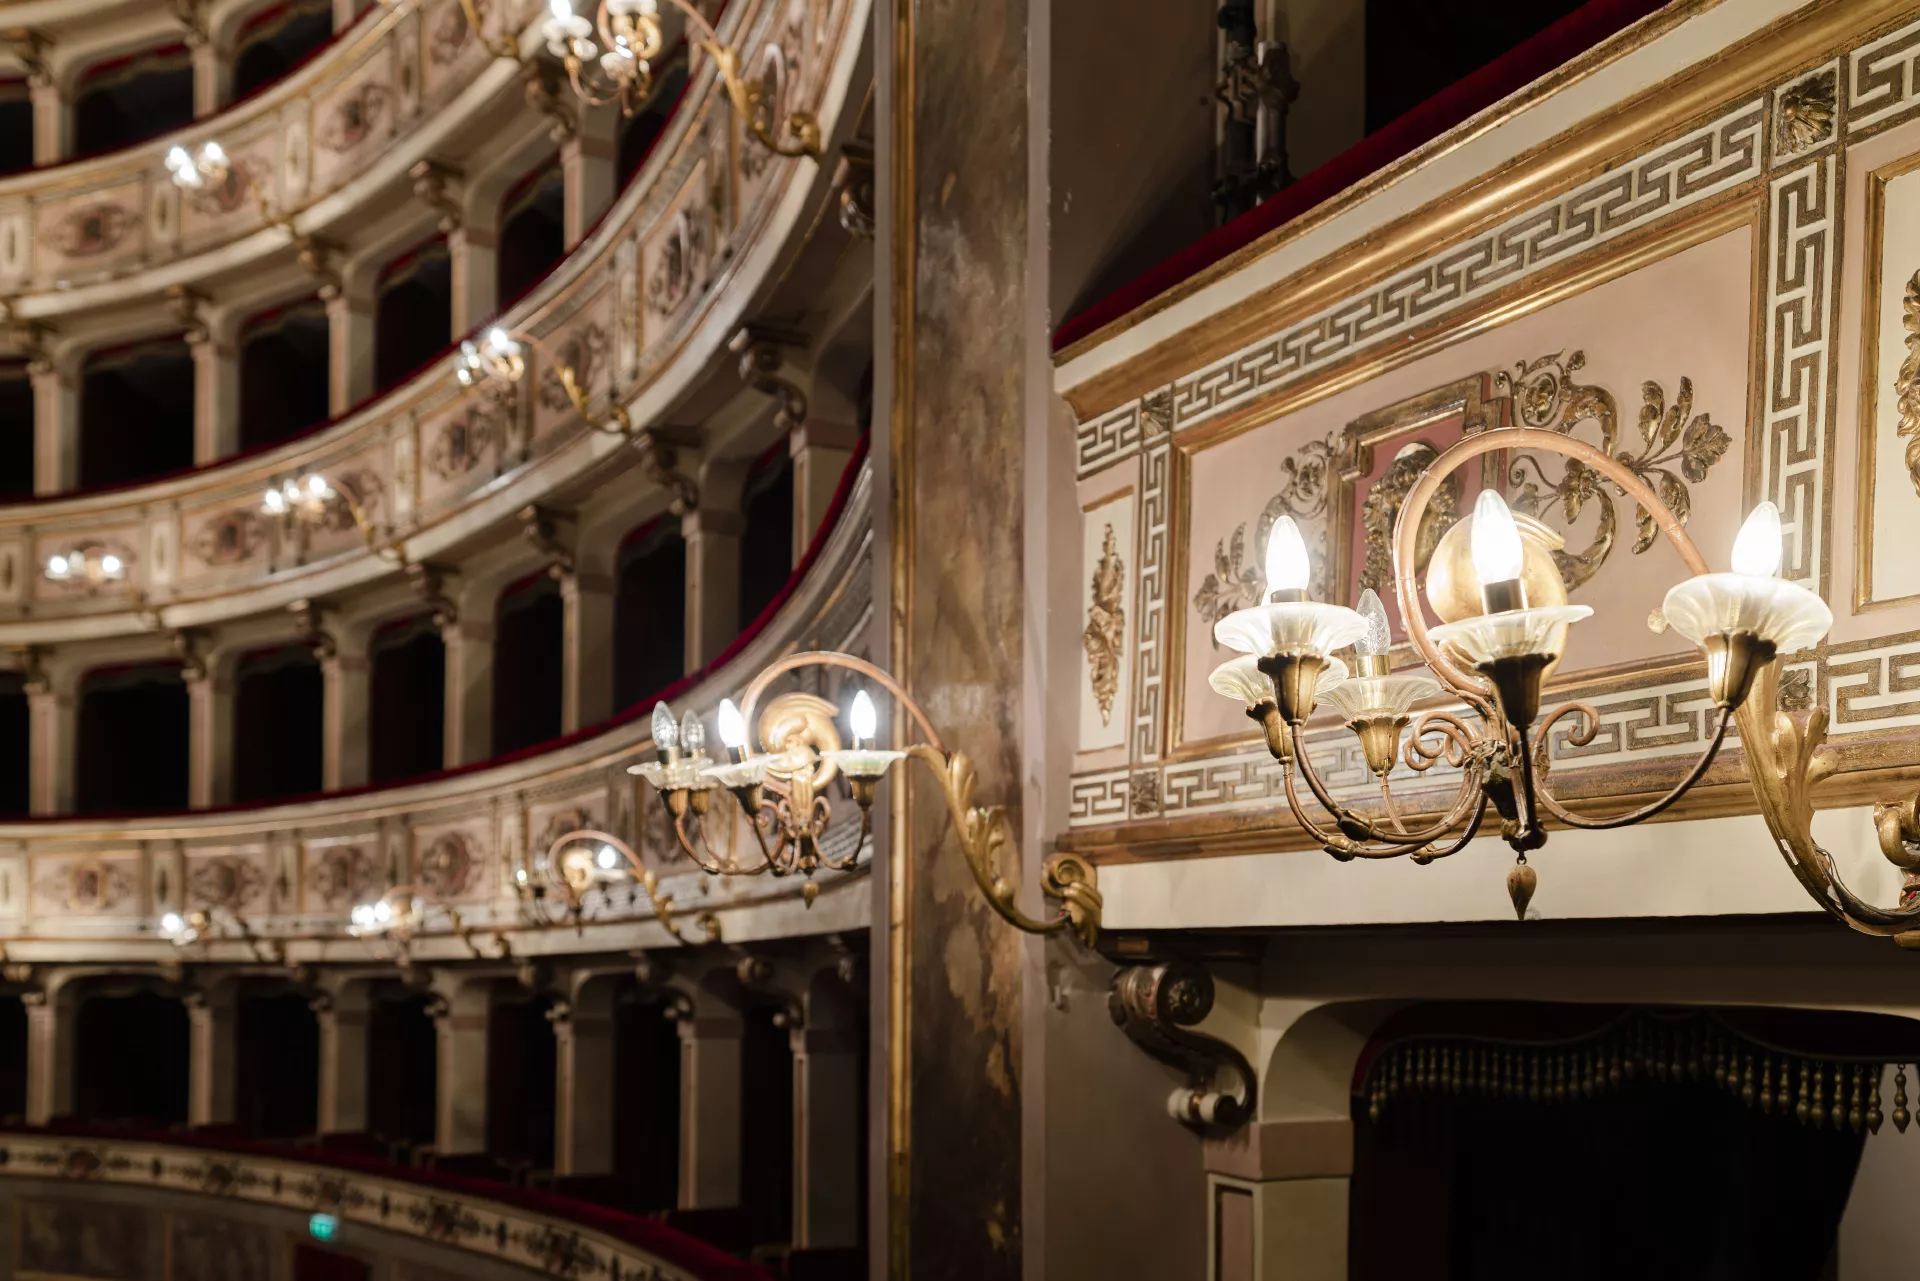 Since the 16th century, theatres as status symbols